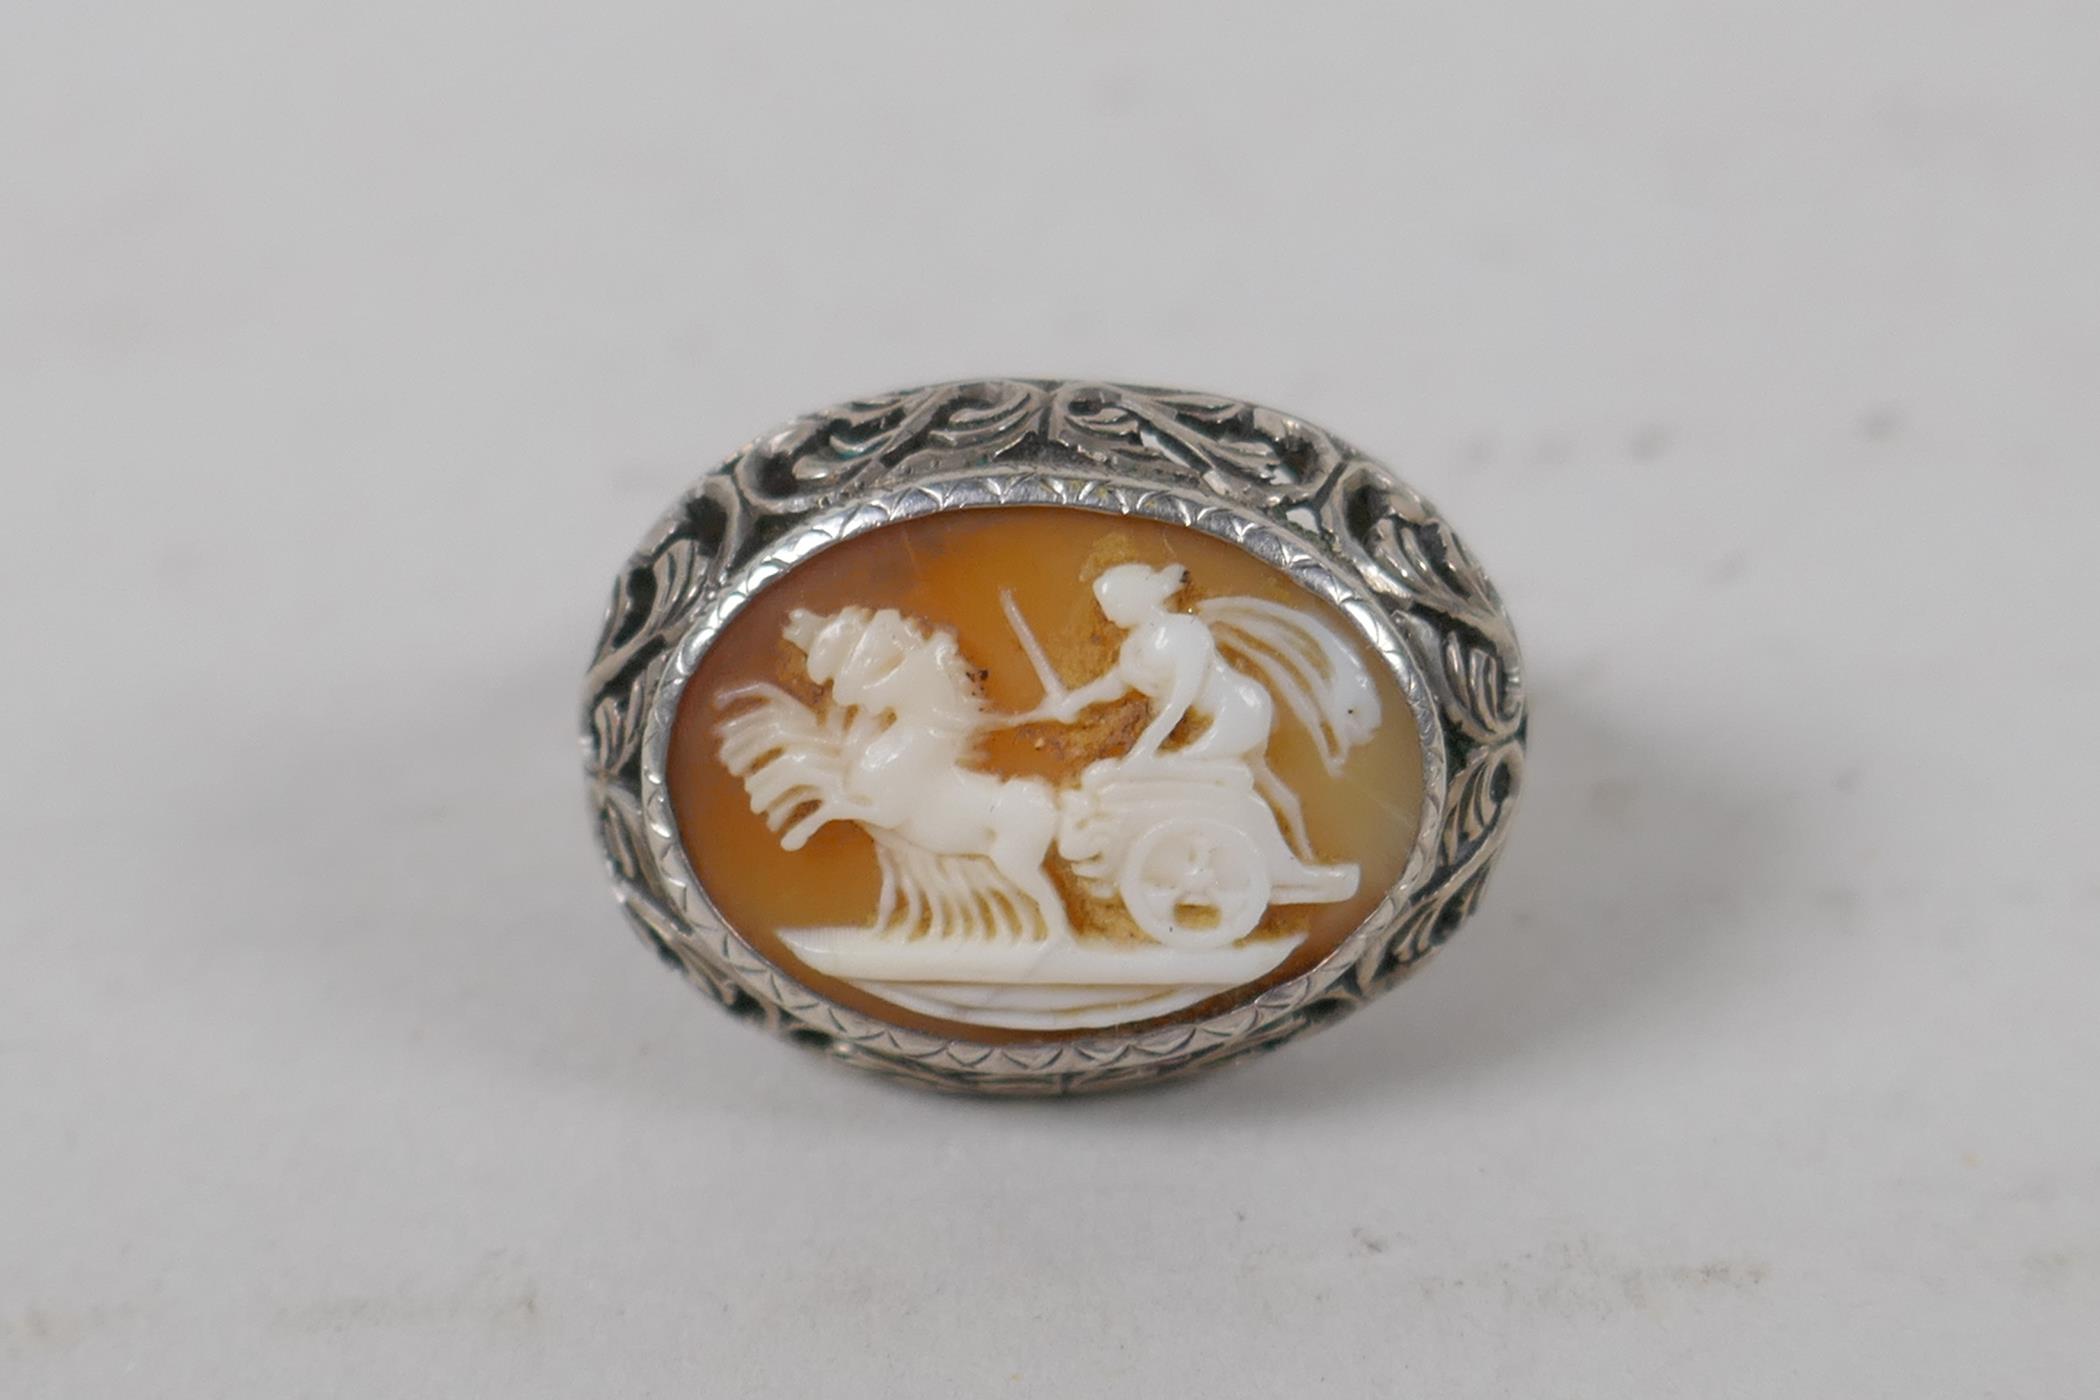 An antique silver cameo bracelet with Greco Roman decorative panels, and a matching ring, size L/M - Image 5 of 6